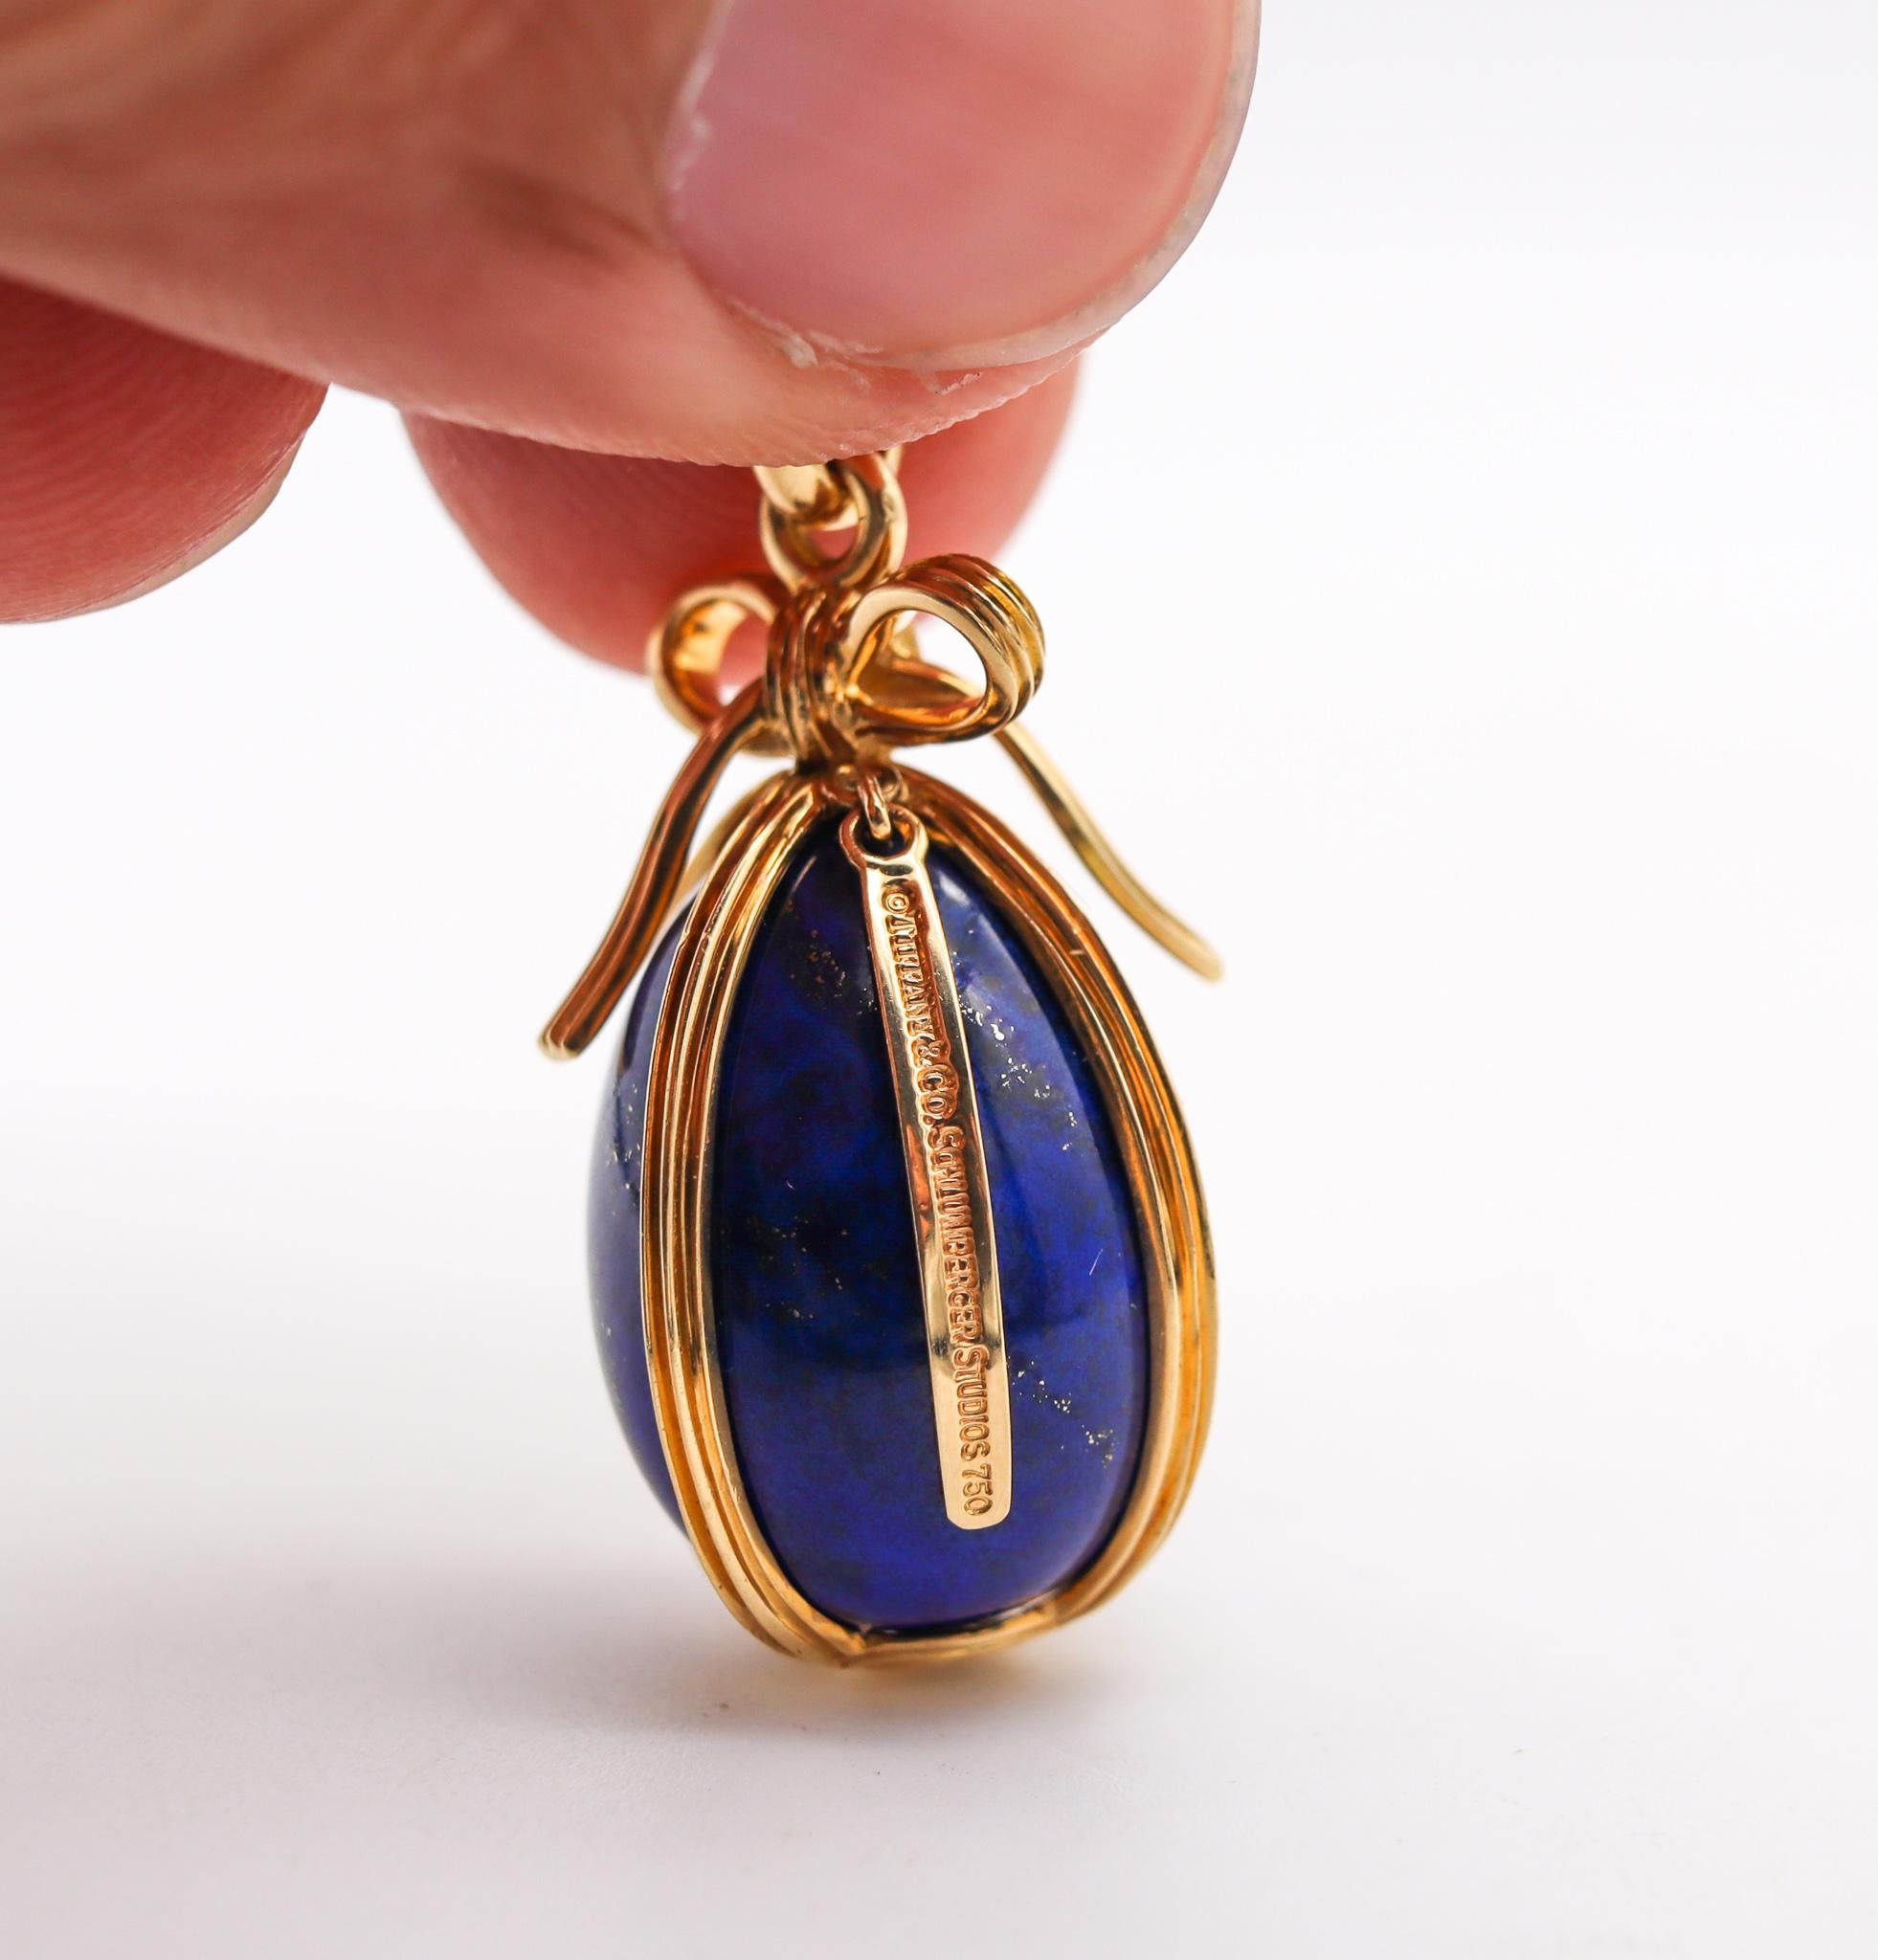 Cabochon Tiffany Co. 1976 Schlumberger Egg Necklace Chain in 18kt Gold with Lapis Lazuli